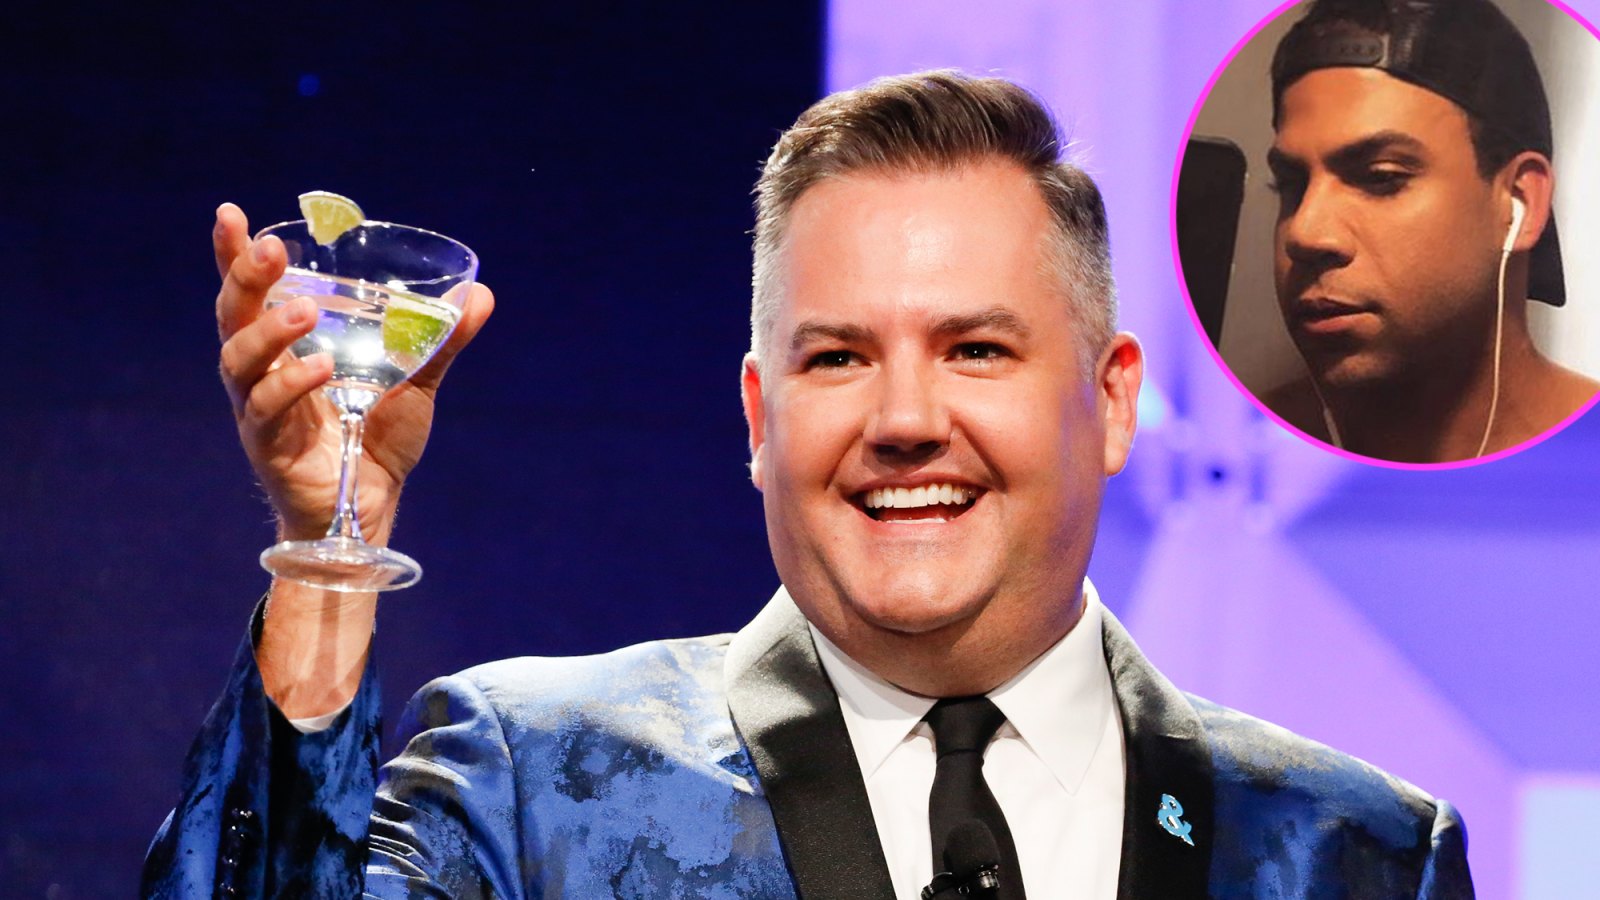 Ross Mathews Is Getting ‘More Serious’ With New Boyfriend Ryan Fogarty: ‘Their Energies Just Click’